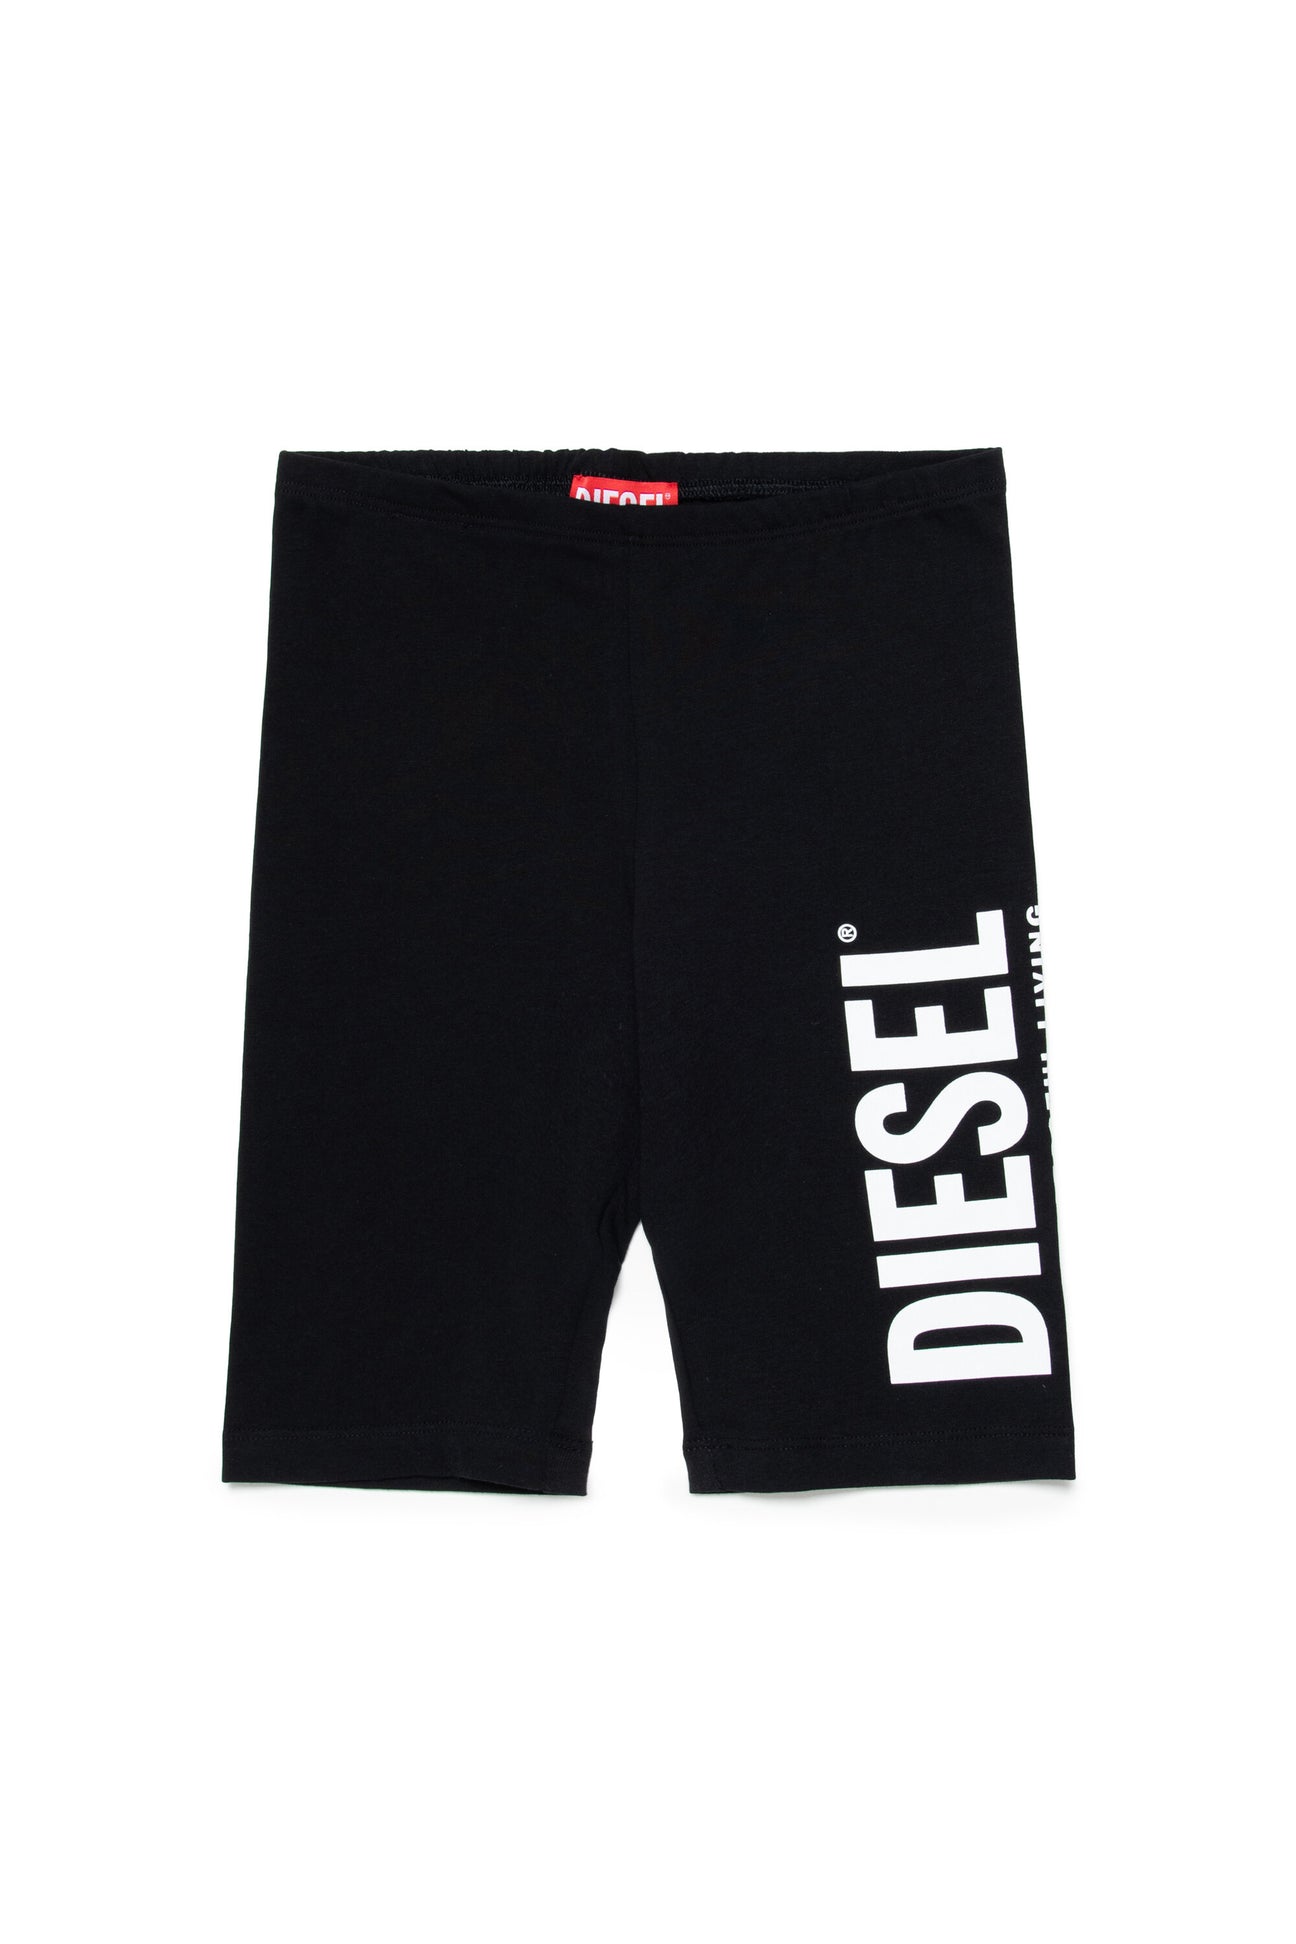 Branded cotton cycling shorts 